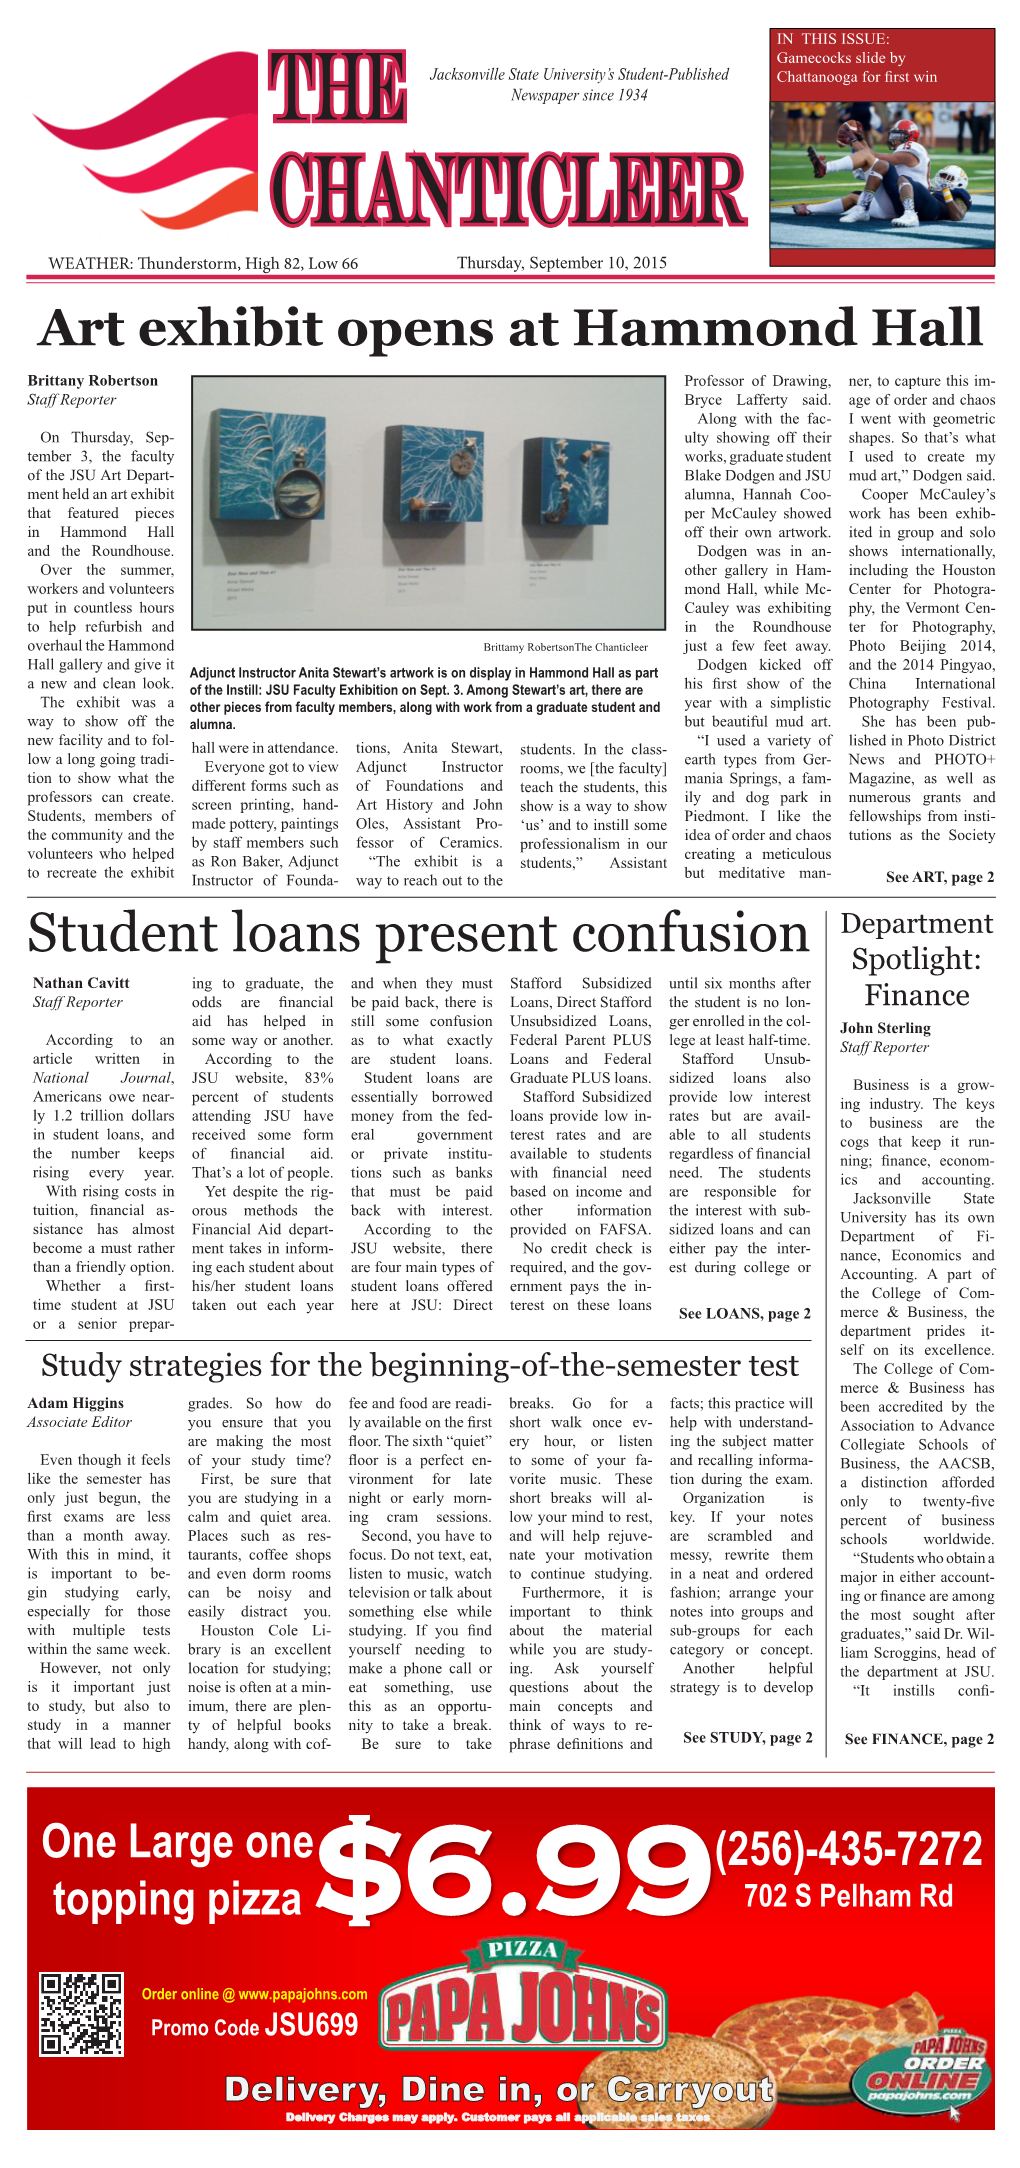 Student Loans Present Confusion